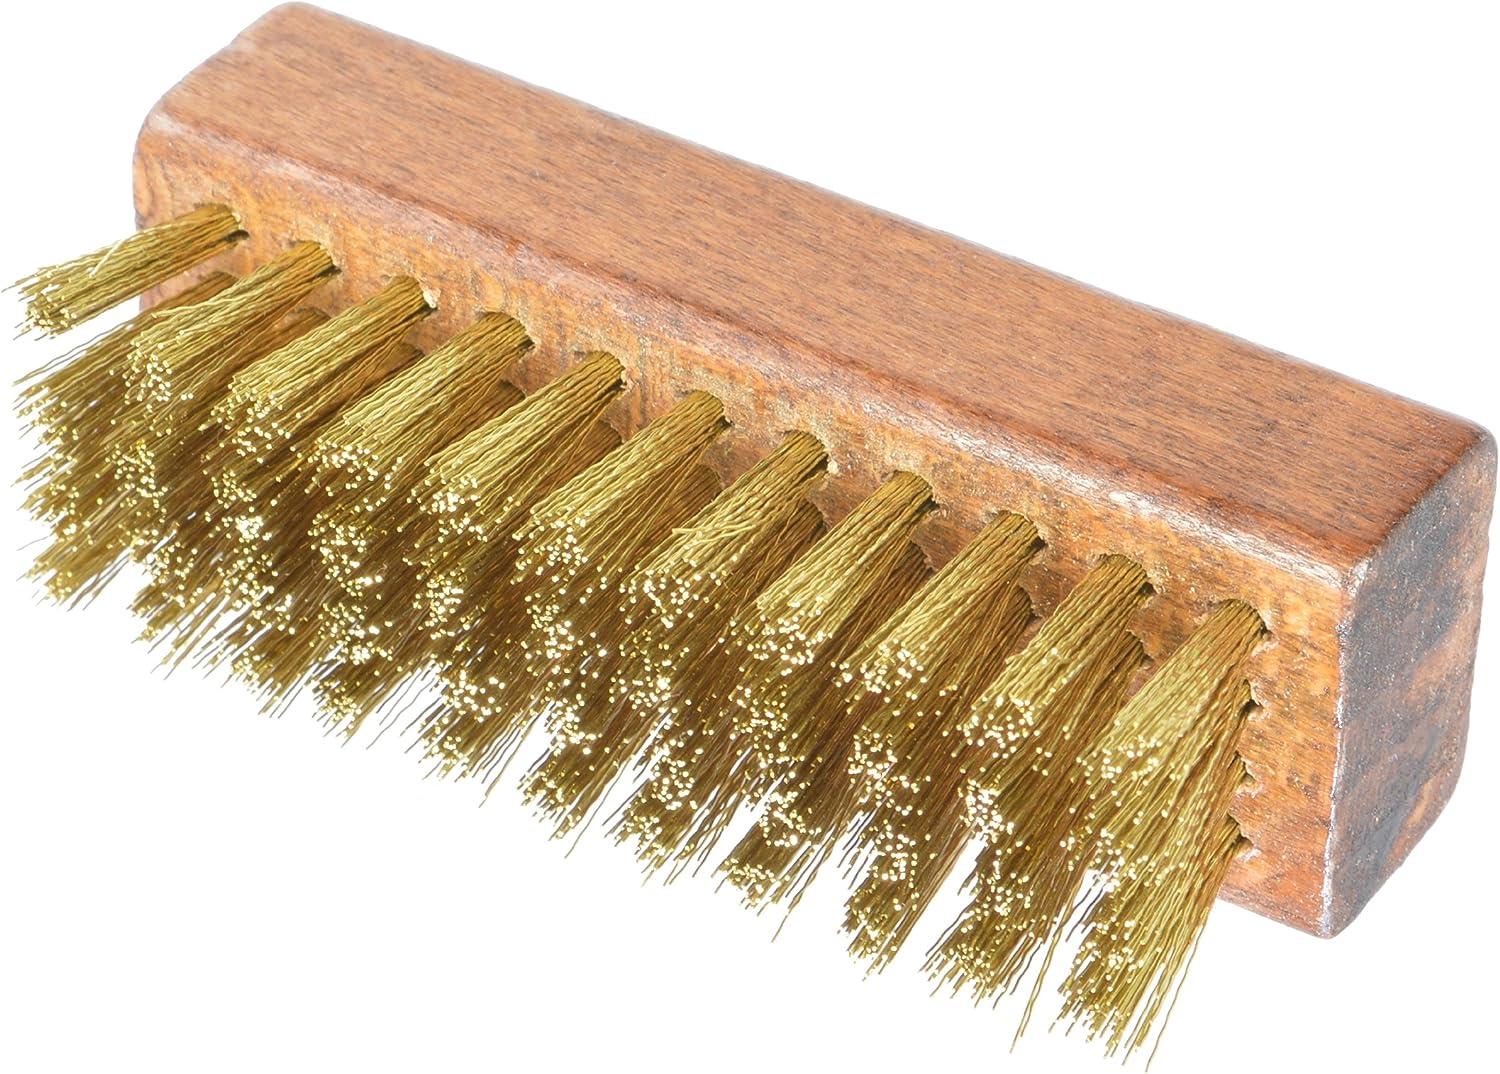 Ralyn Suede Shoe Brush - Brass Bristle Brush - 3 Suede Brush for